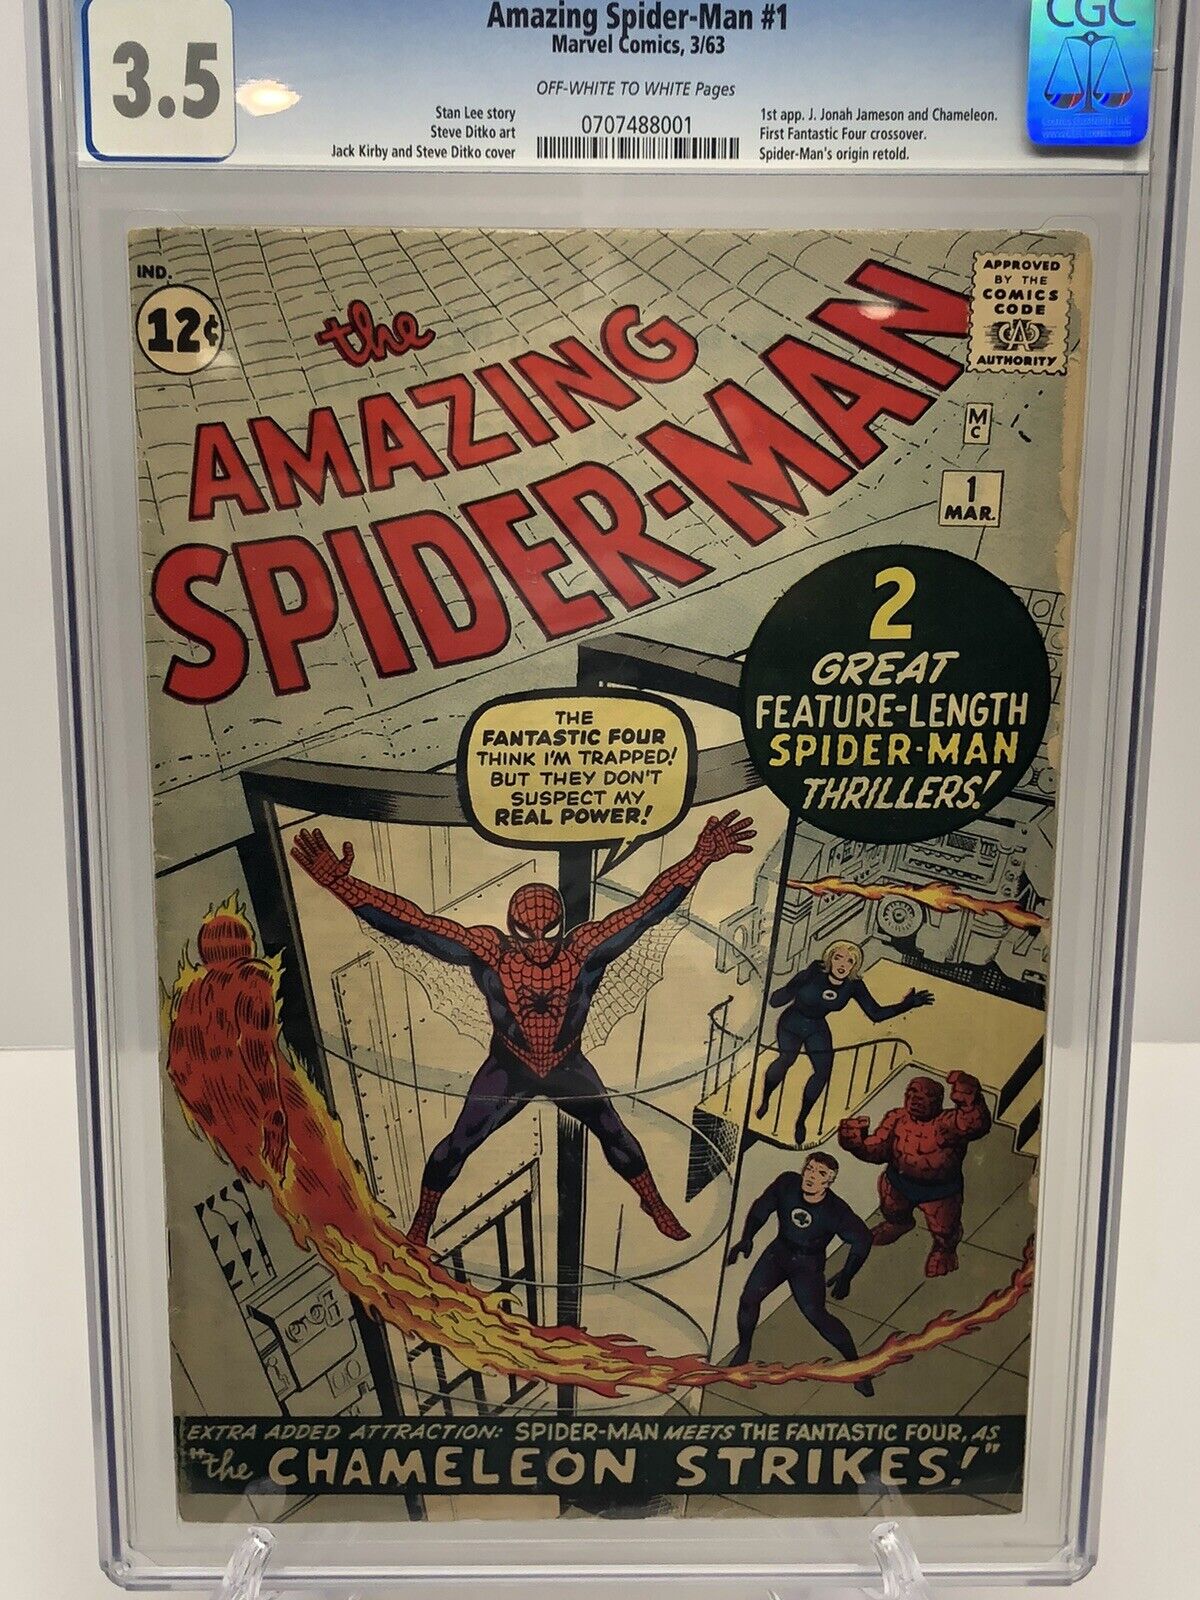 Amazing Spider-Man #1 March 1963 Comic Book Marvel Fantastic Four Crossover CGC